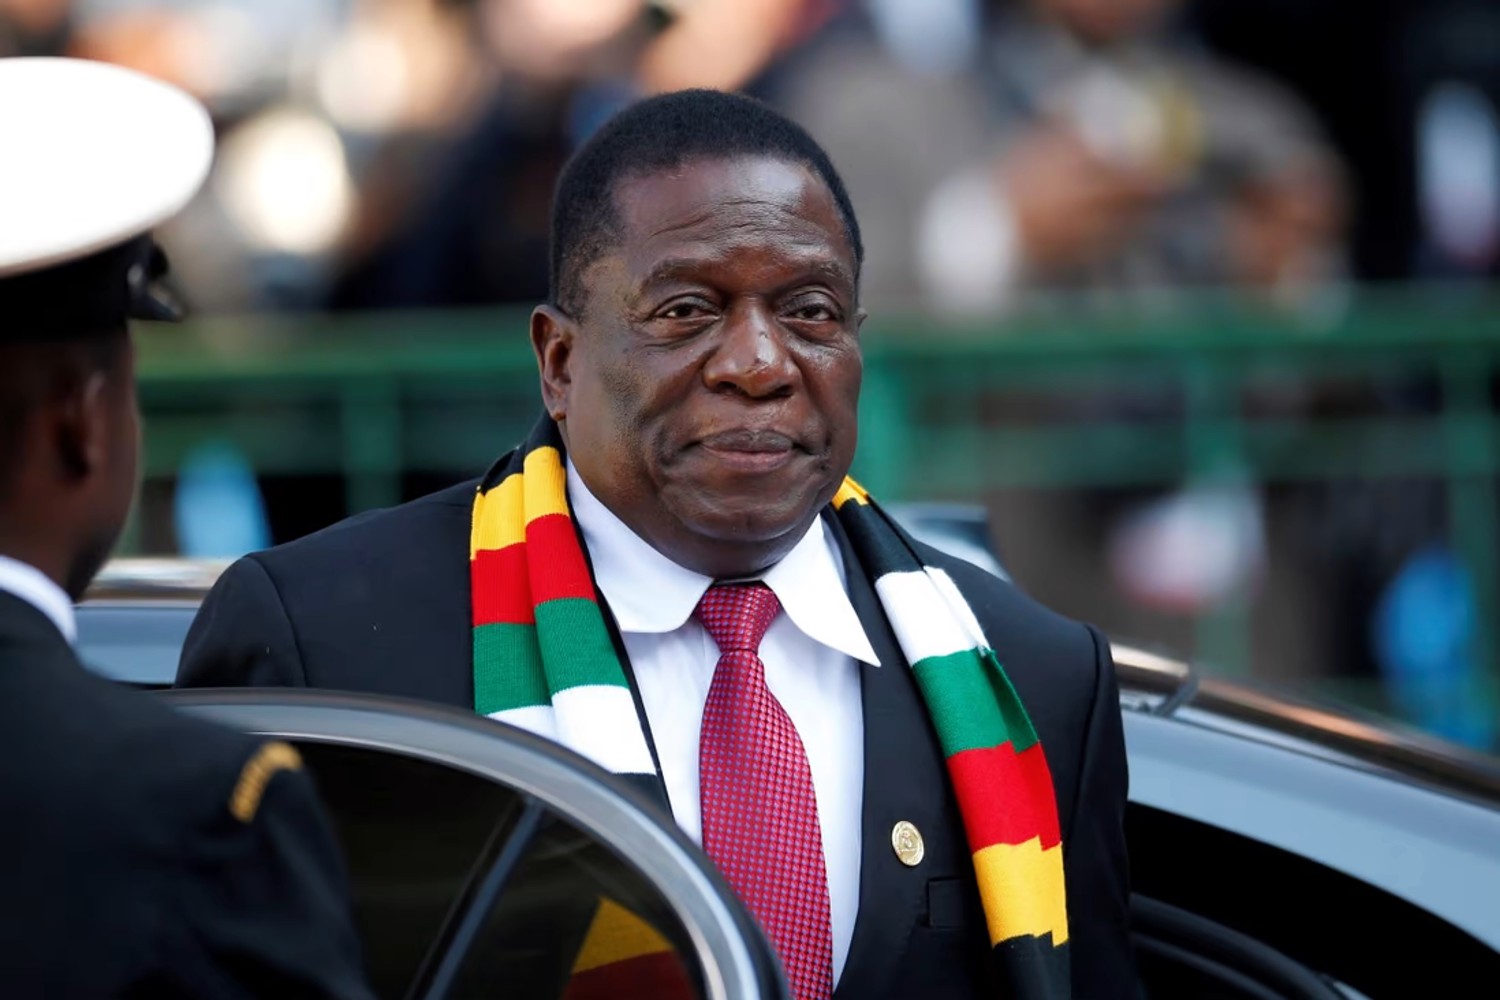 President Mnangagwa Launches Borehole Drilling Scheme - 200 Boreholes To Be Drilled in Harare, Chitungwiza